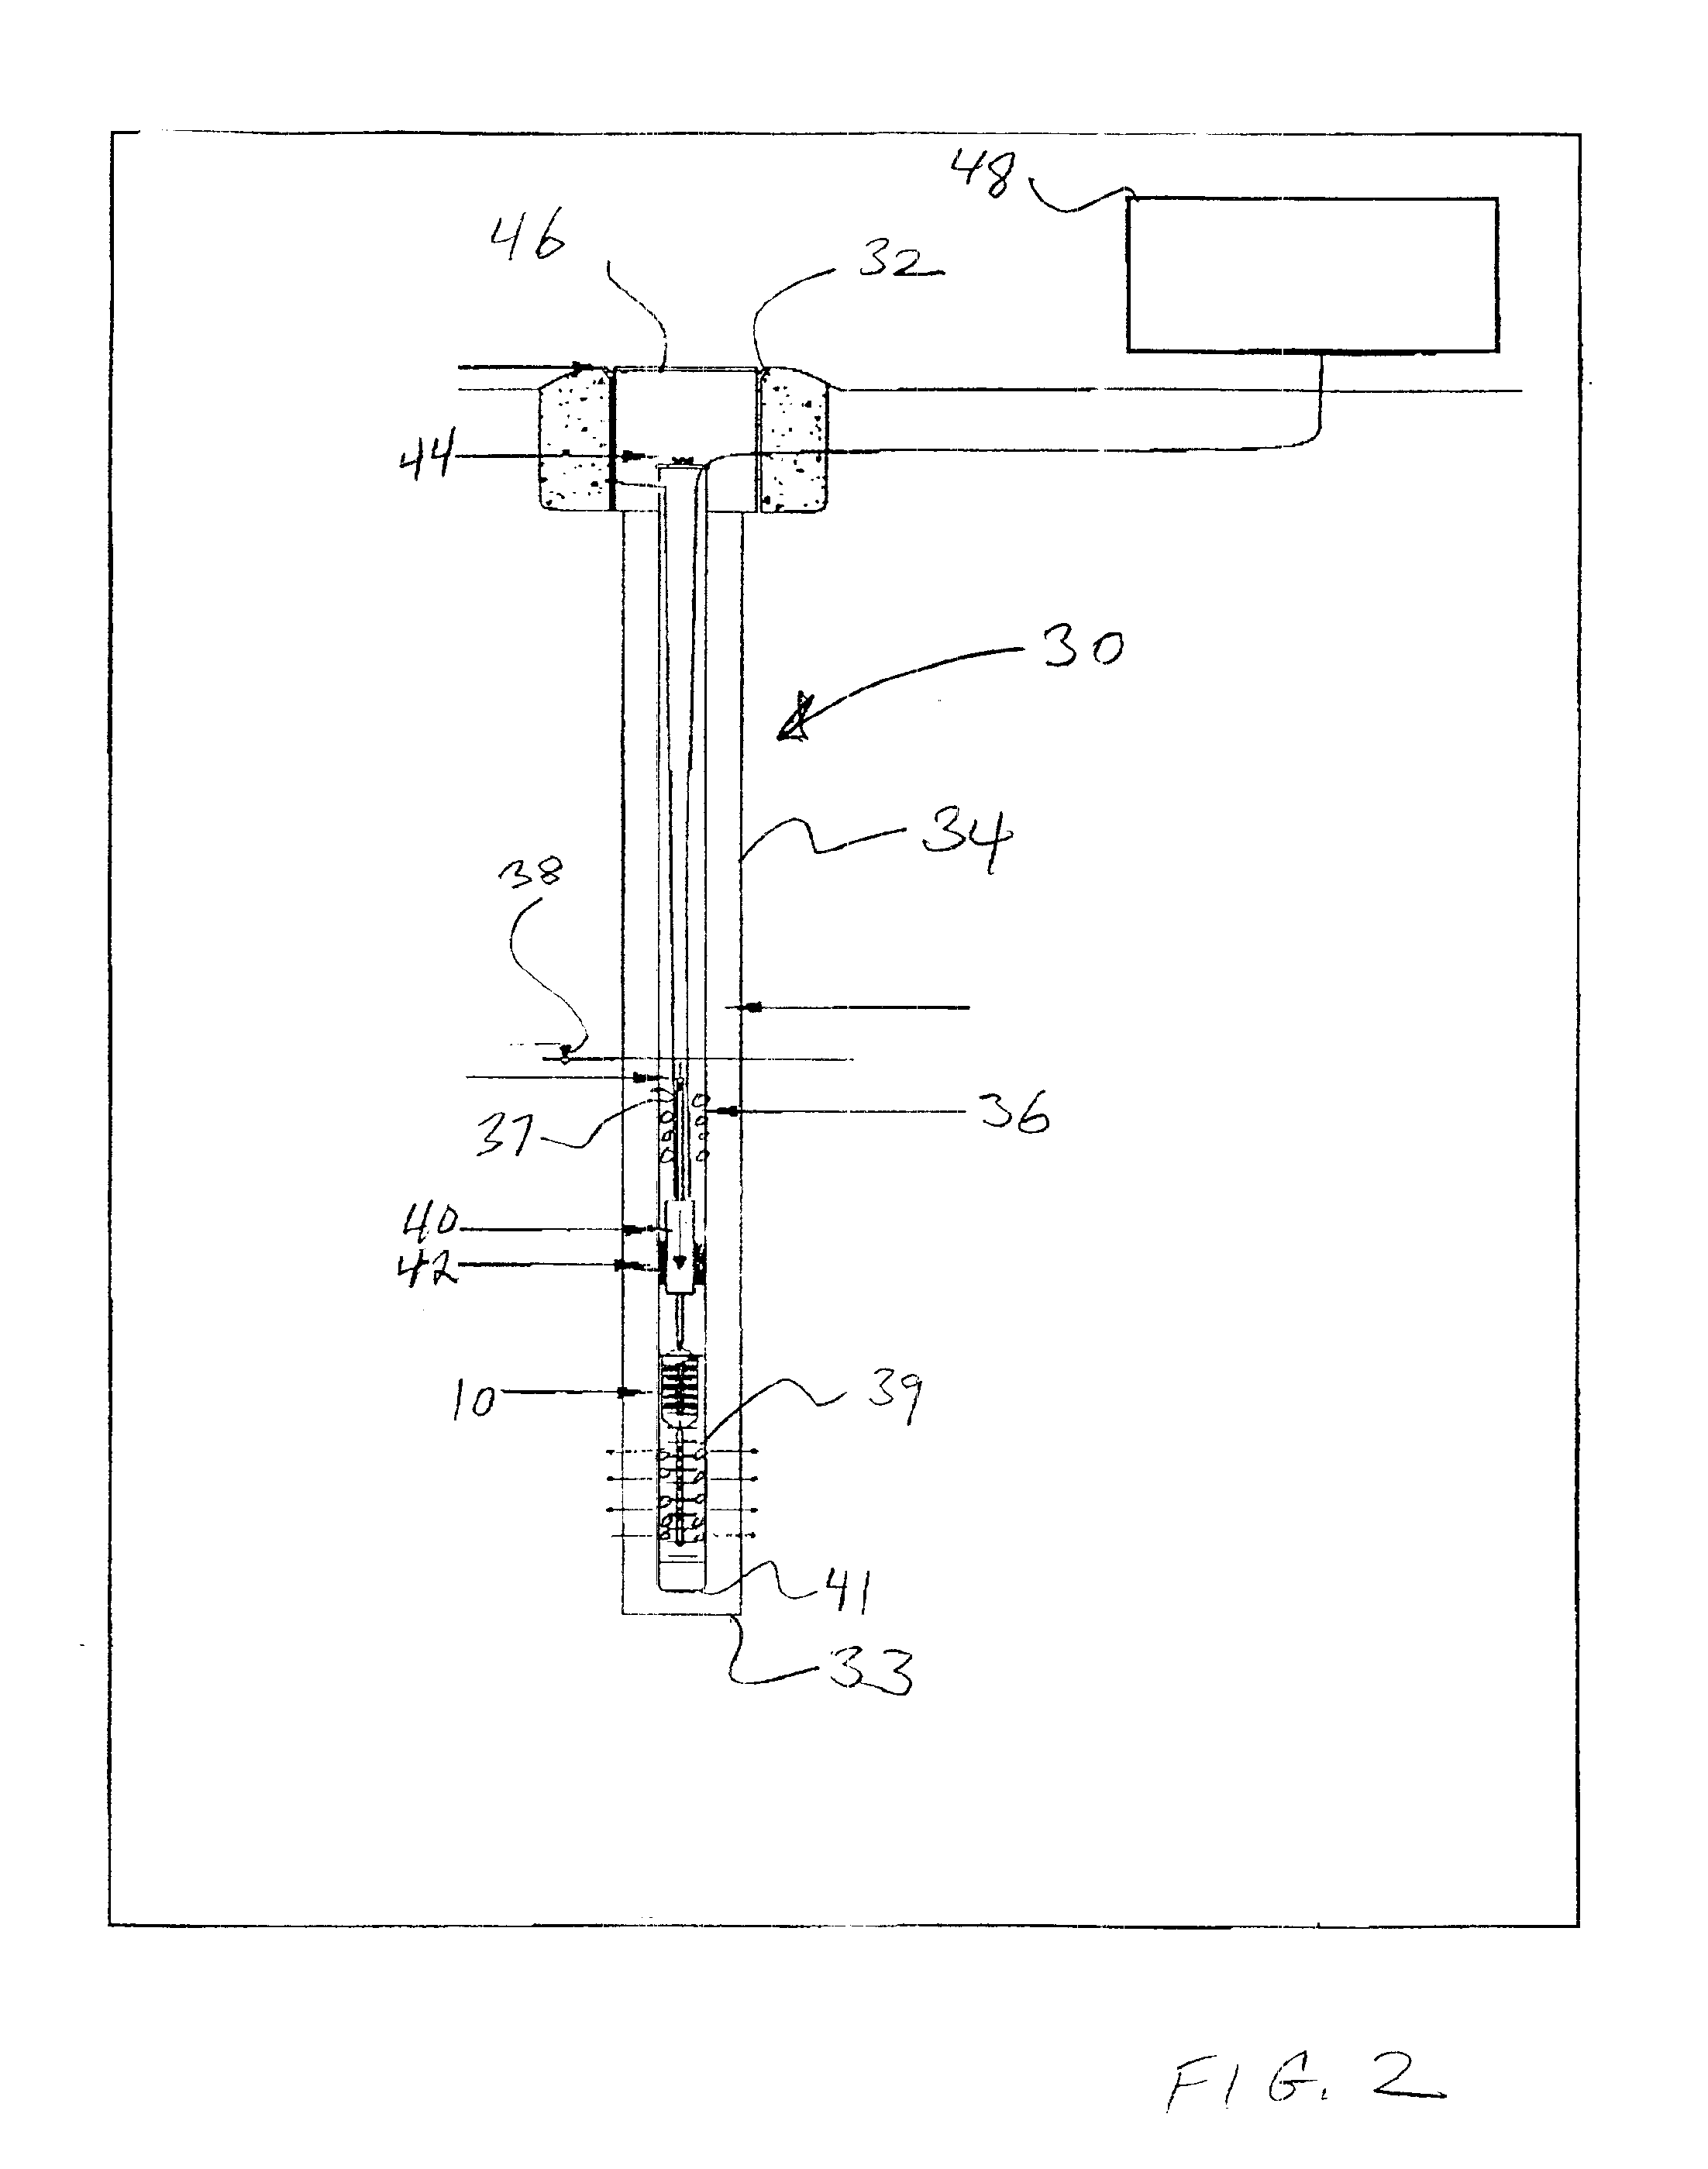 Electrolytic catalytic oxidation system